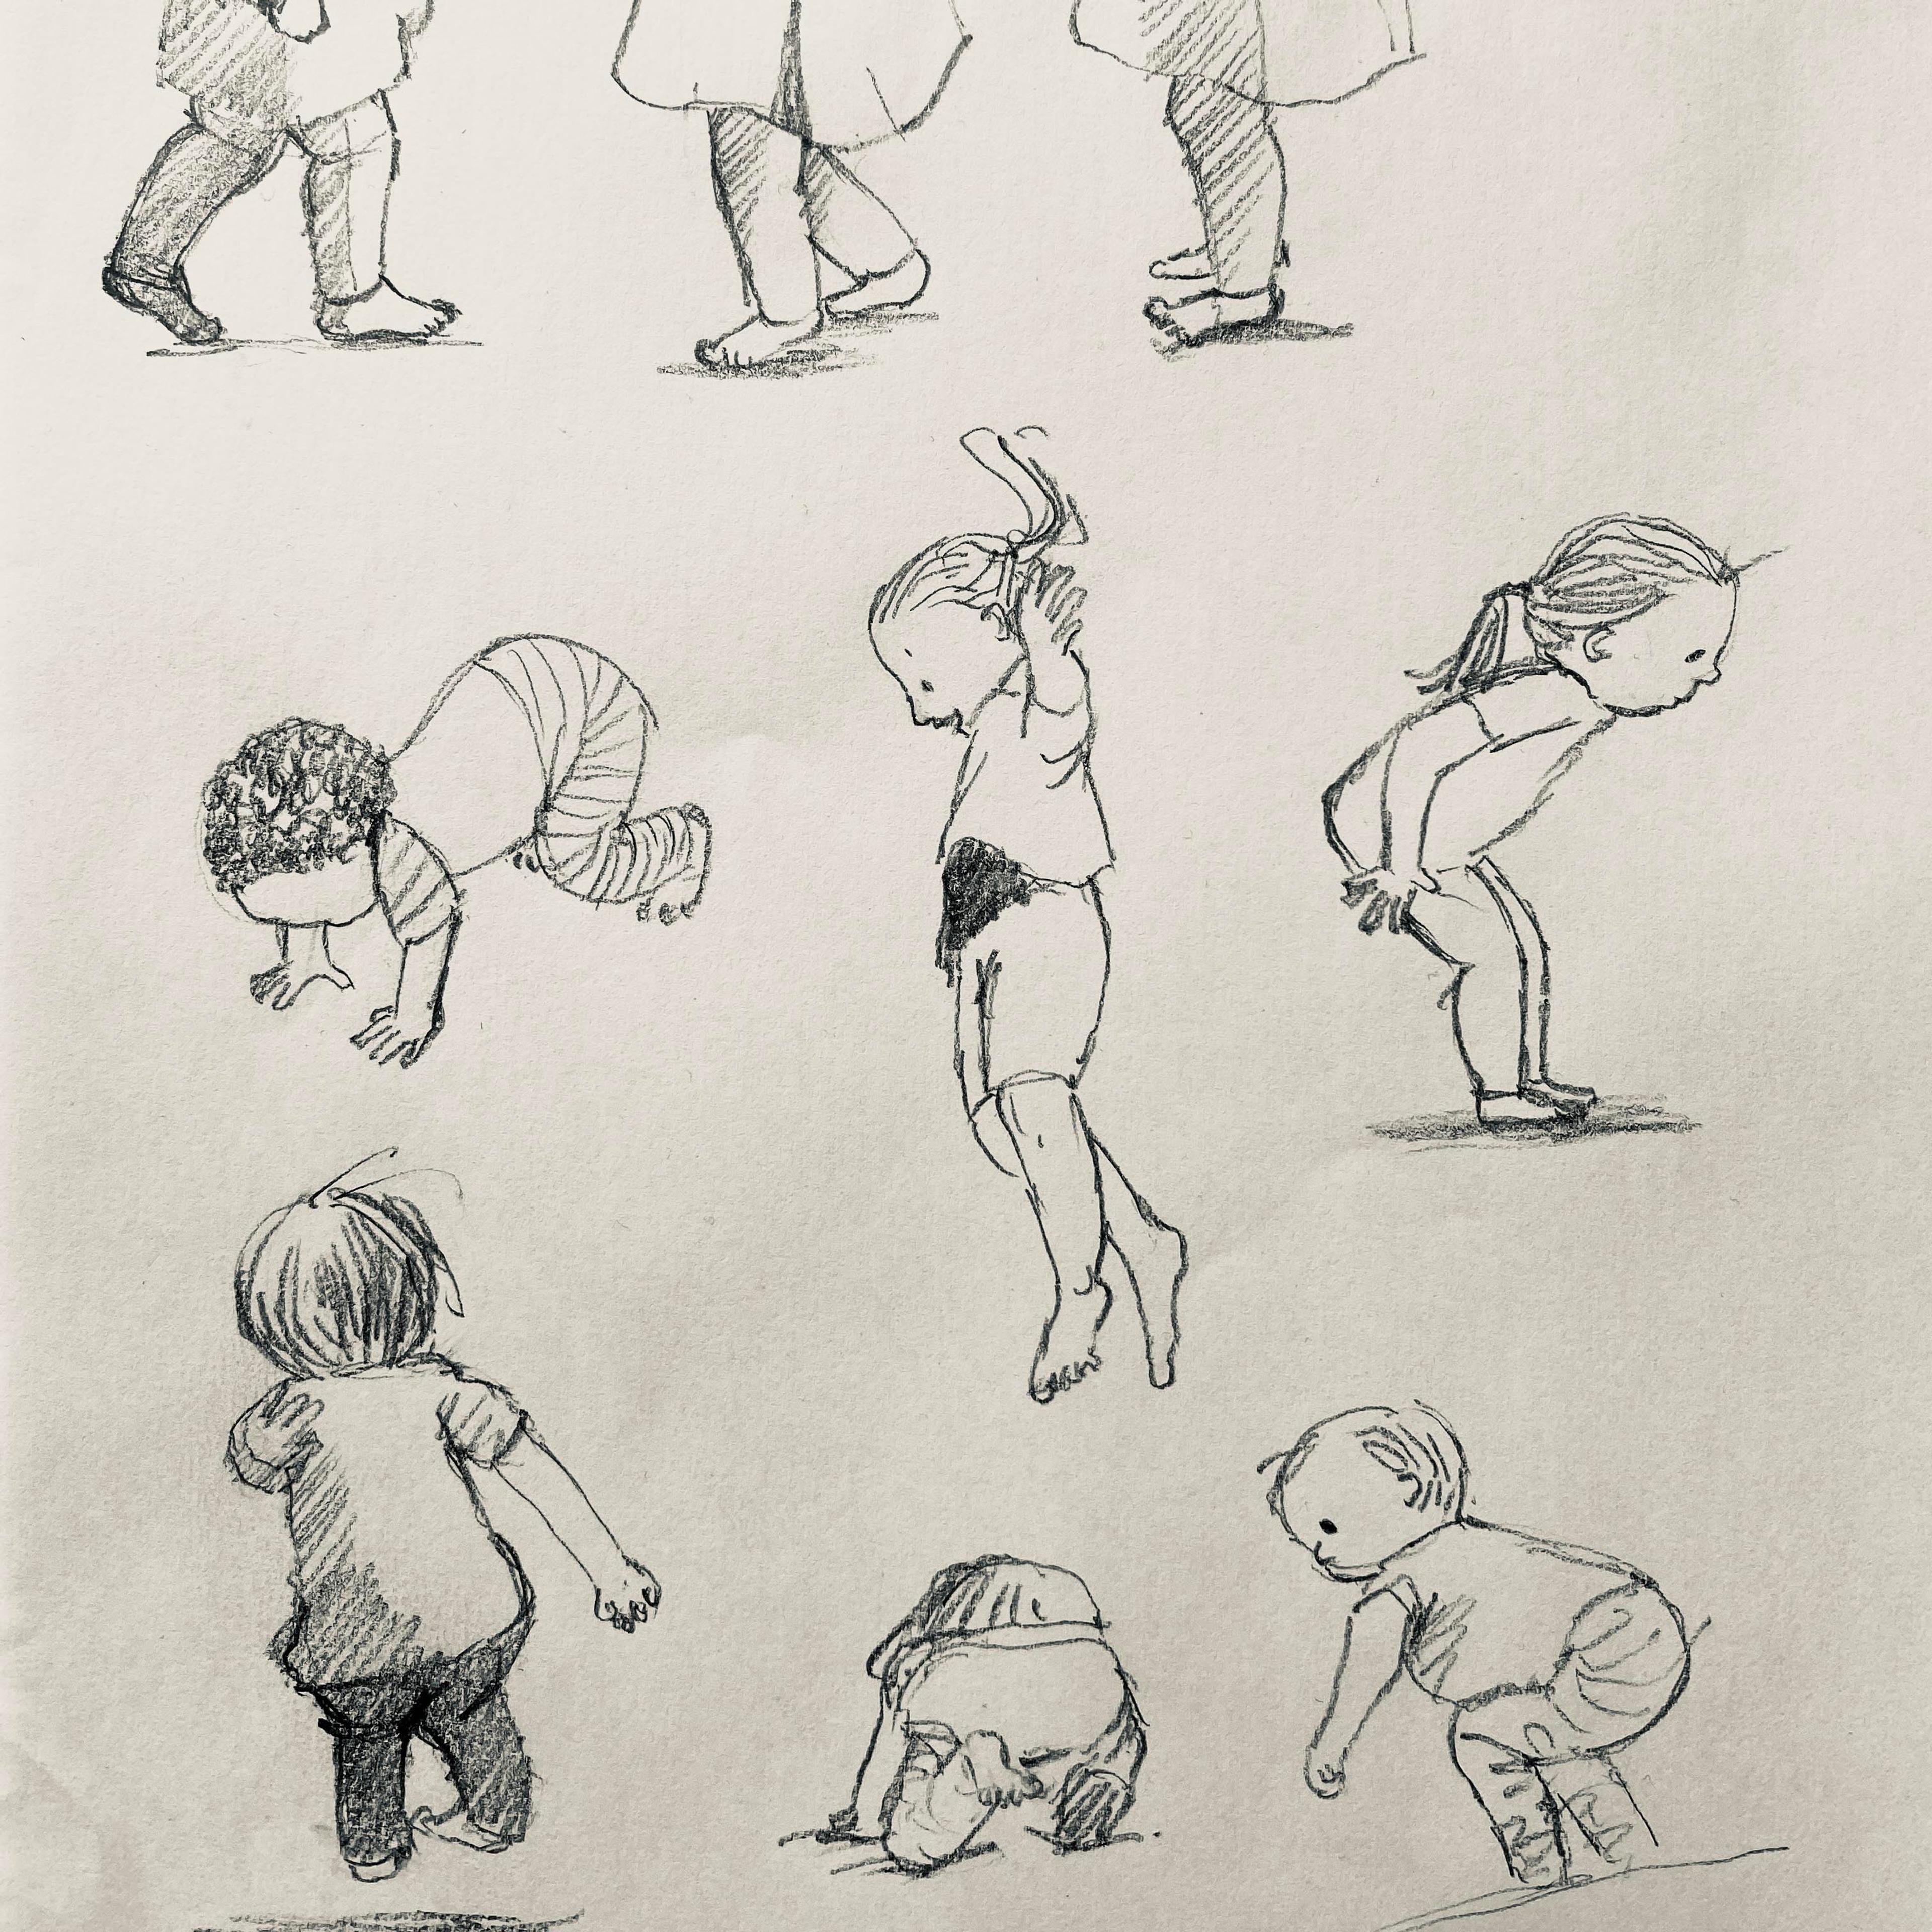 Pencil illustrations of work in progress drawings of children jumping.